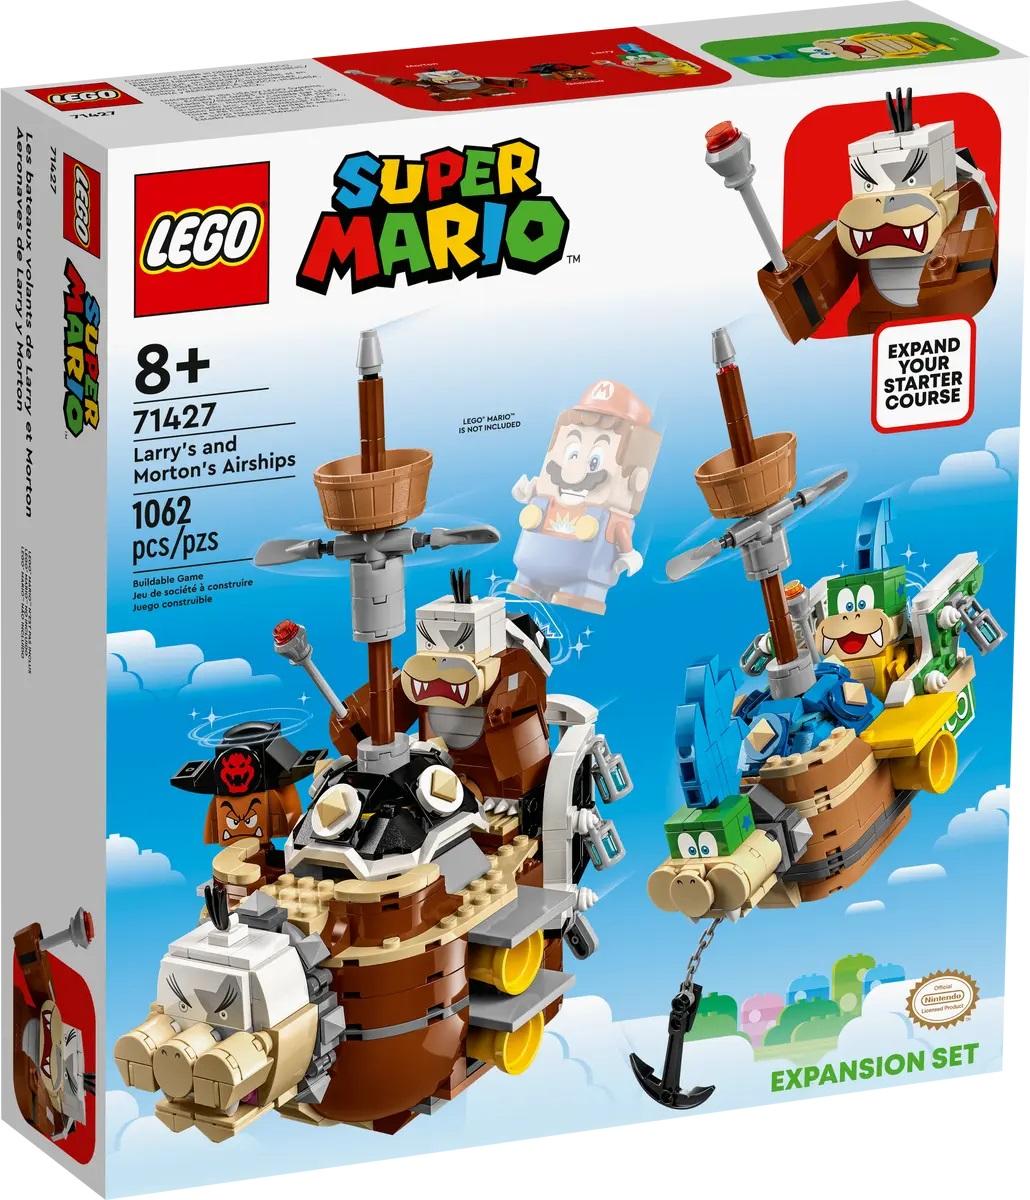 LEGO Super Mario - Larry's and Morton&rsquo;s Airships Expansion Set - 71427